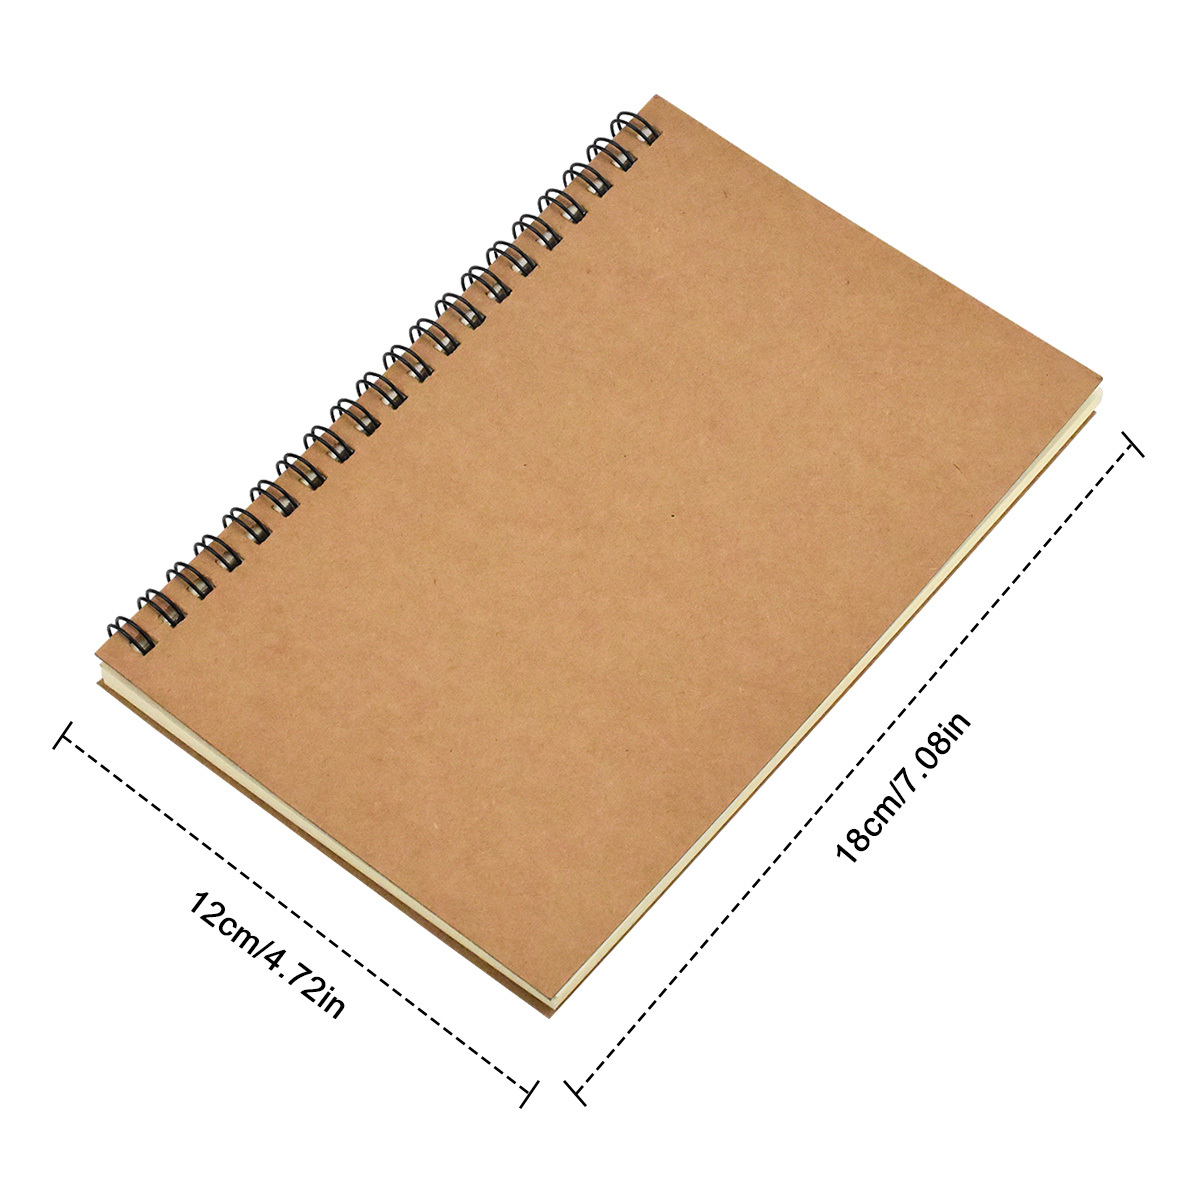 A5 Blank Notebook Journal Bulk Hardcover Sketchbook 100 Sheets/200 Pages  8.3 x 5.7 inches 80gsm Thick Paper for Drawing Art Travelers Ideal Gifts